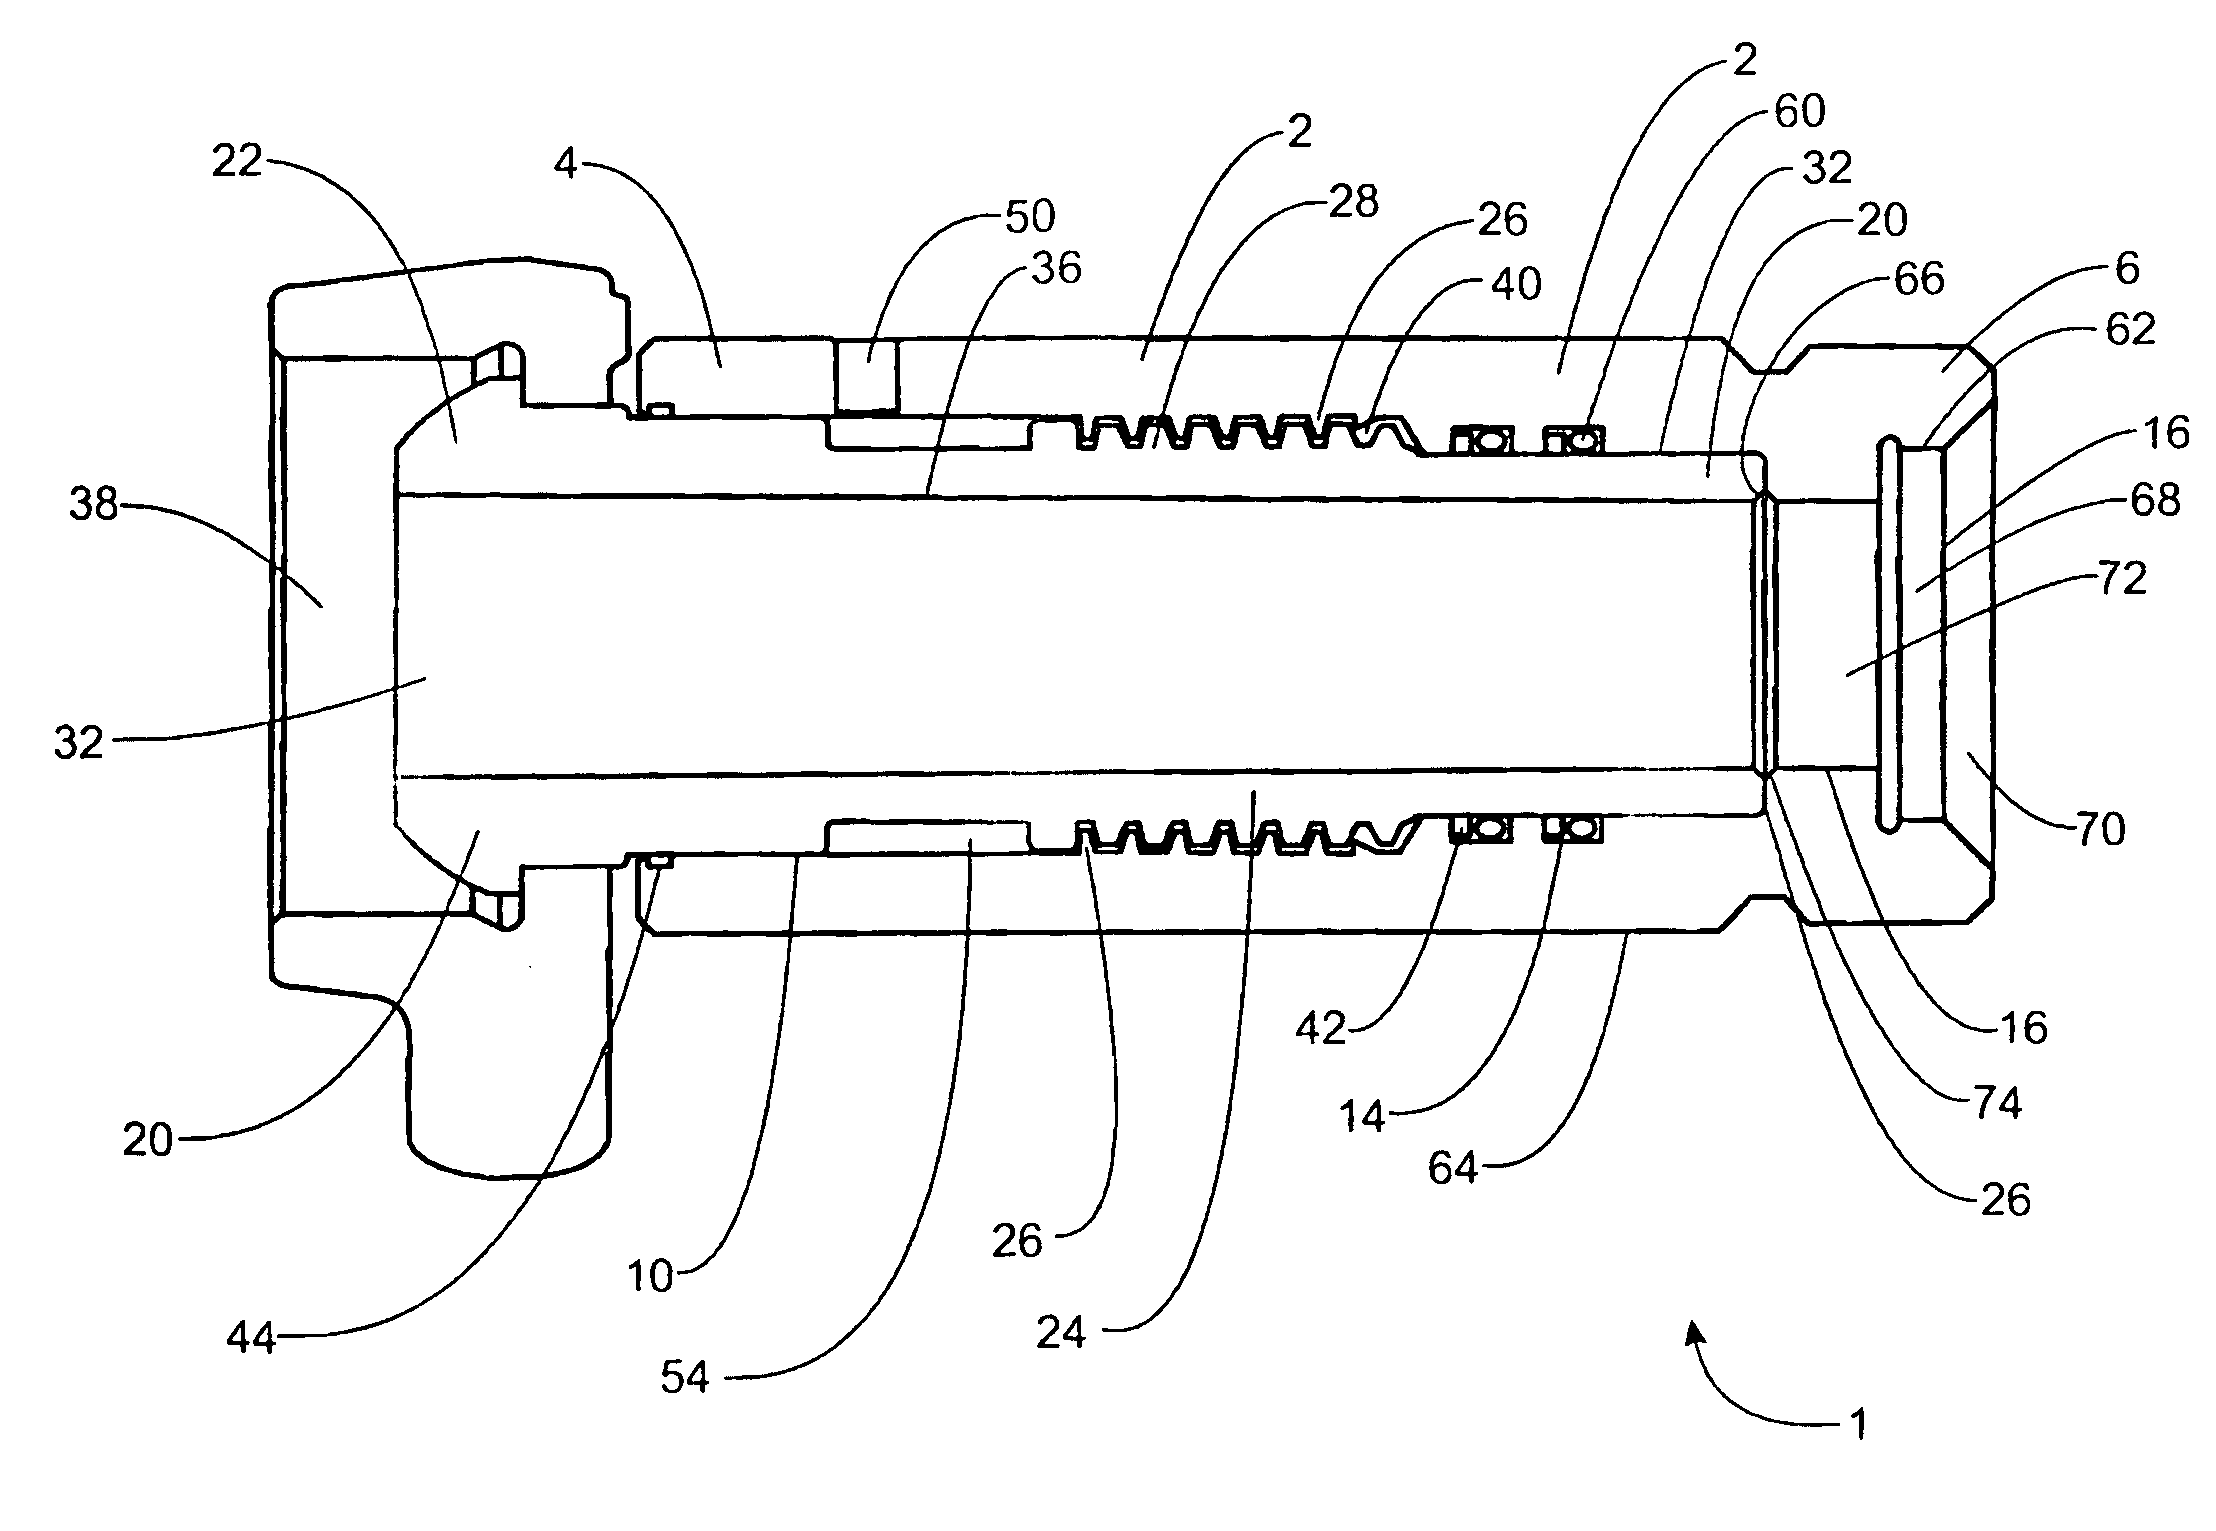 Adjustable Length Discharge Joint for High Pressure Applications